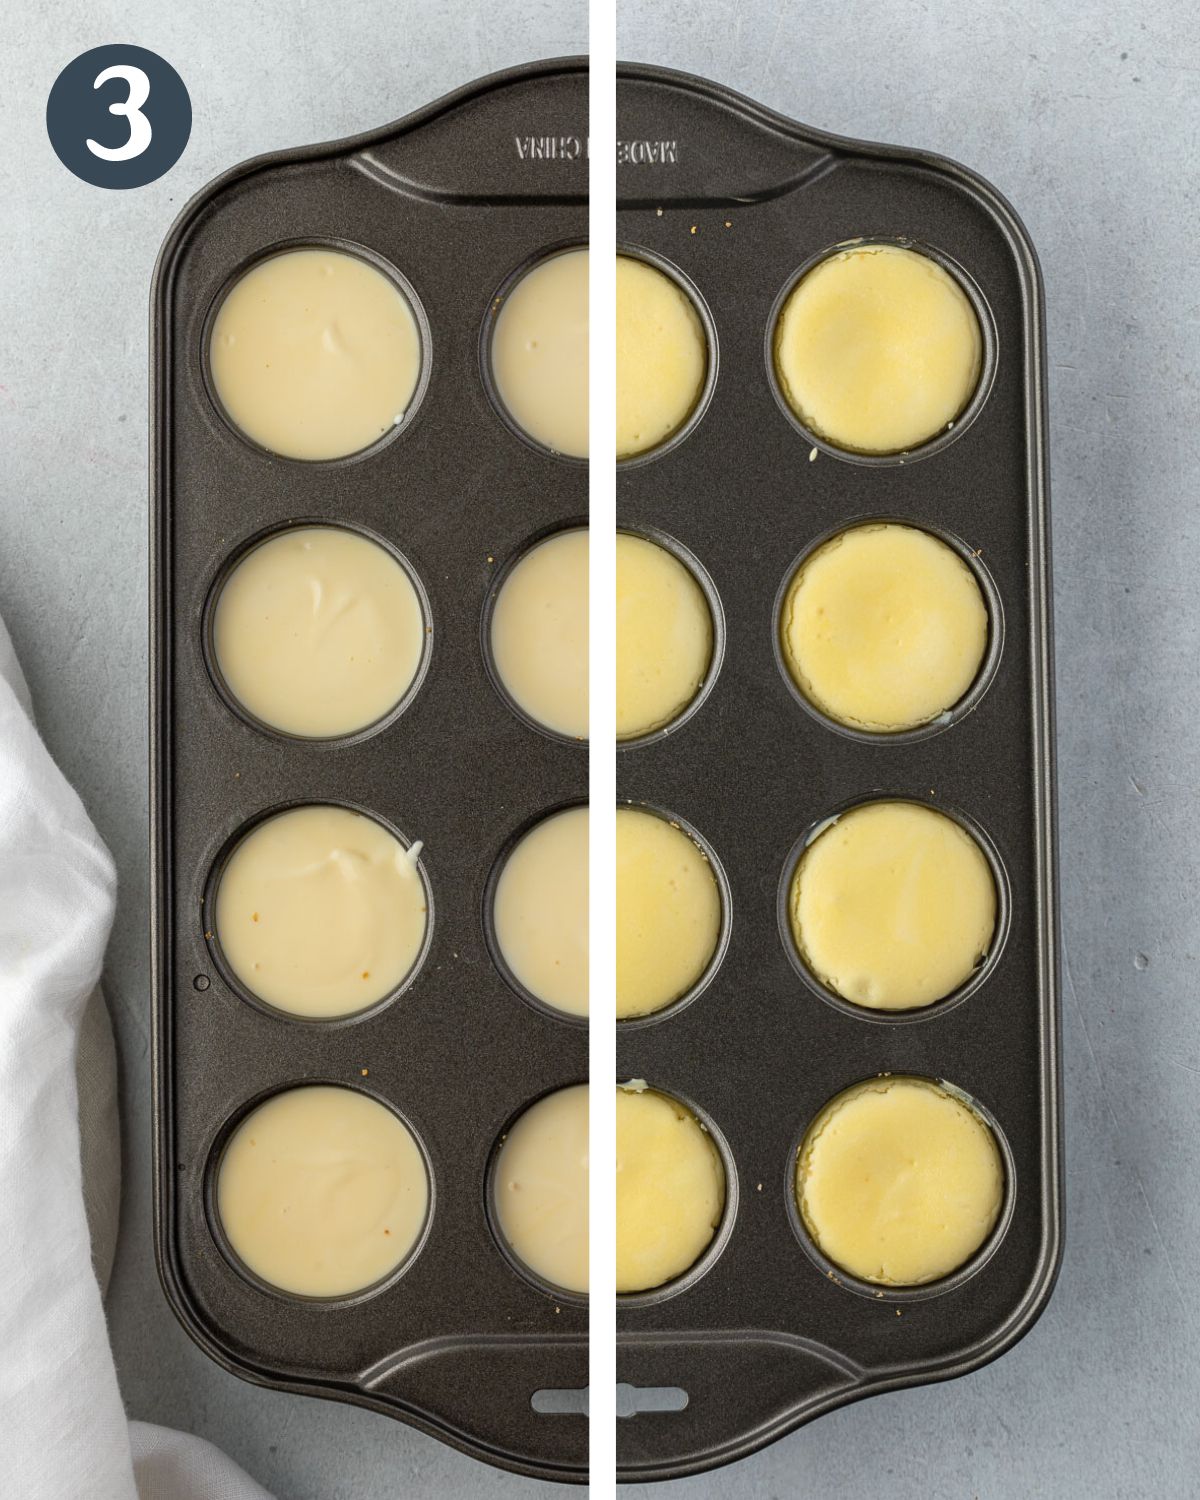 Split image, half showing unbaked cheesecakes in mini cheesecake pan and other showing them baked.